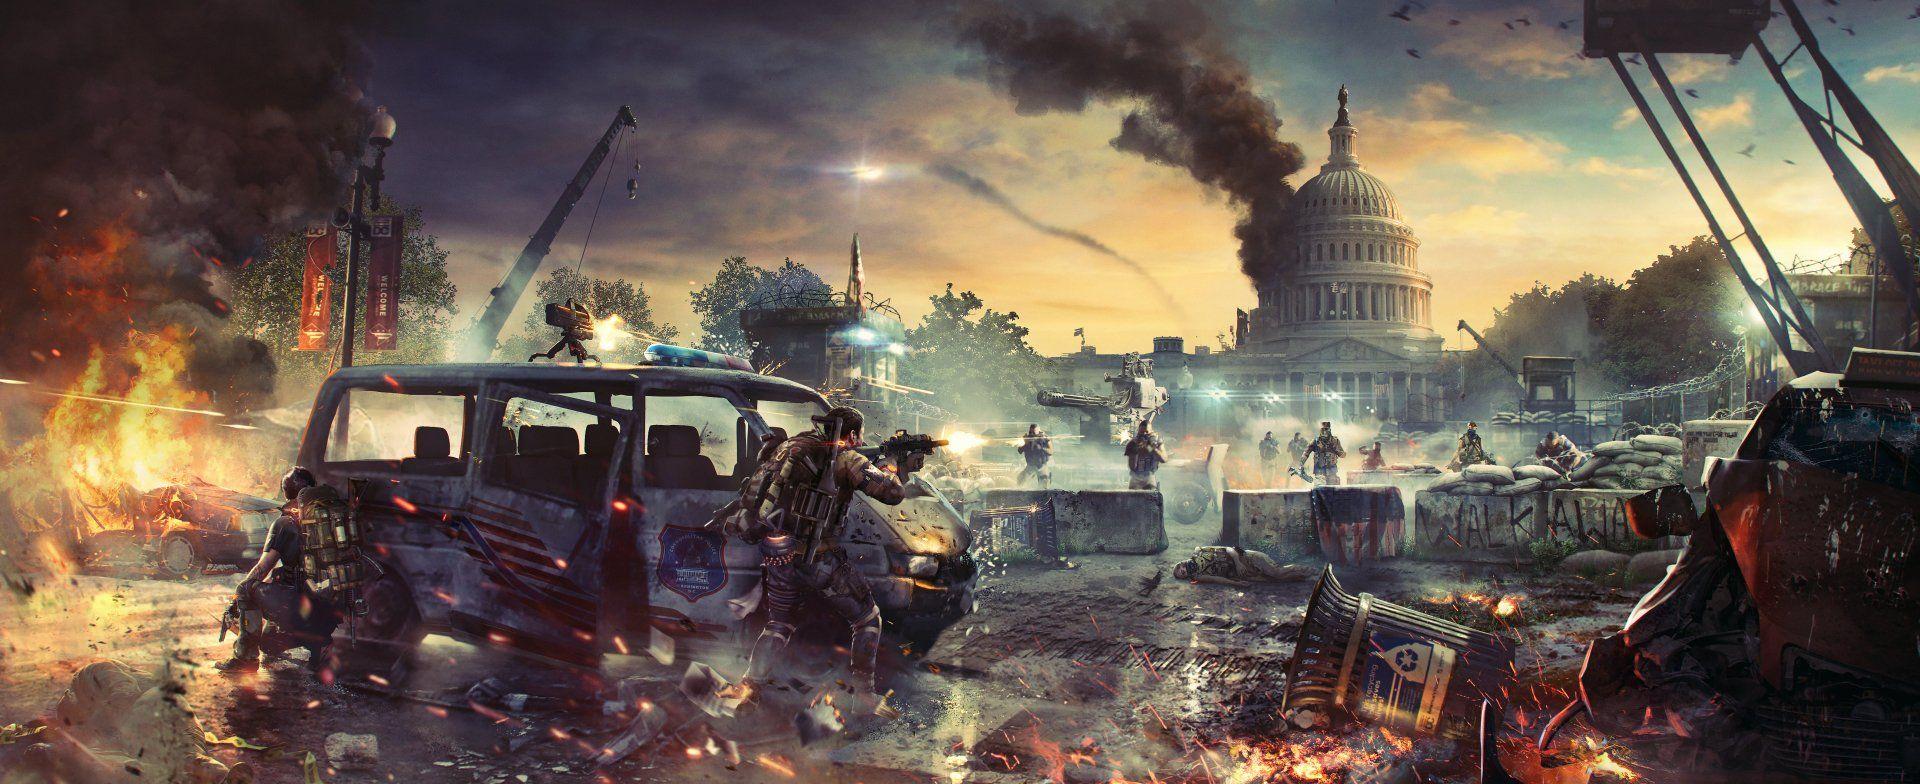 The Division 2 Wallpaper Free The Division 2 Background